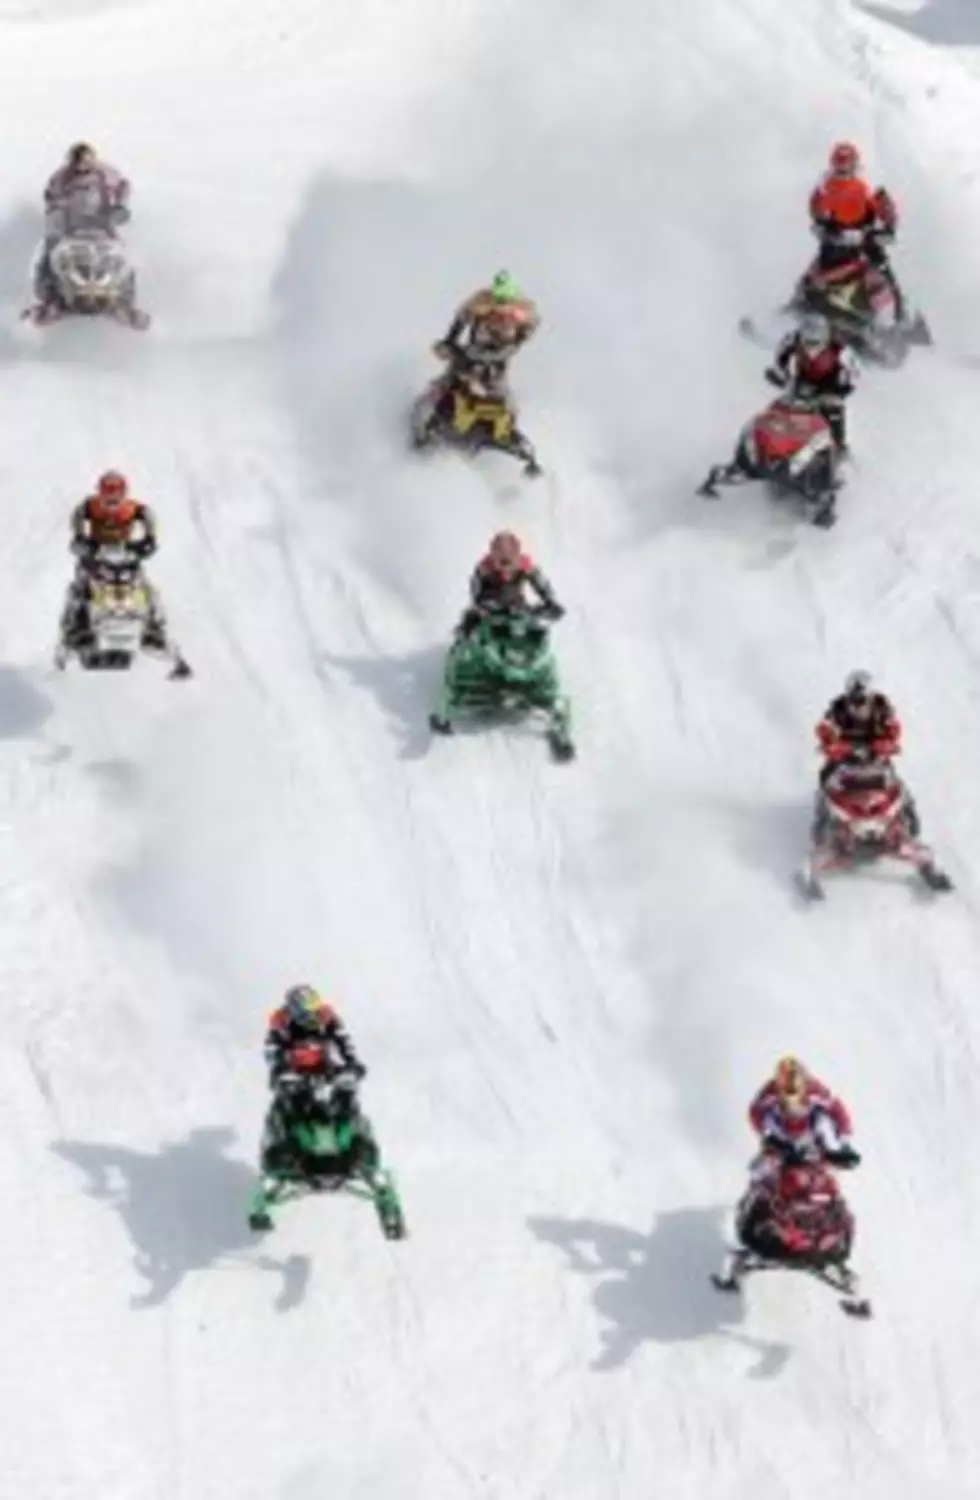 Snowmobilers&#8211;They&#8217;re Cool People